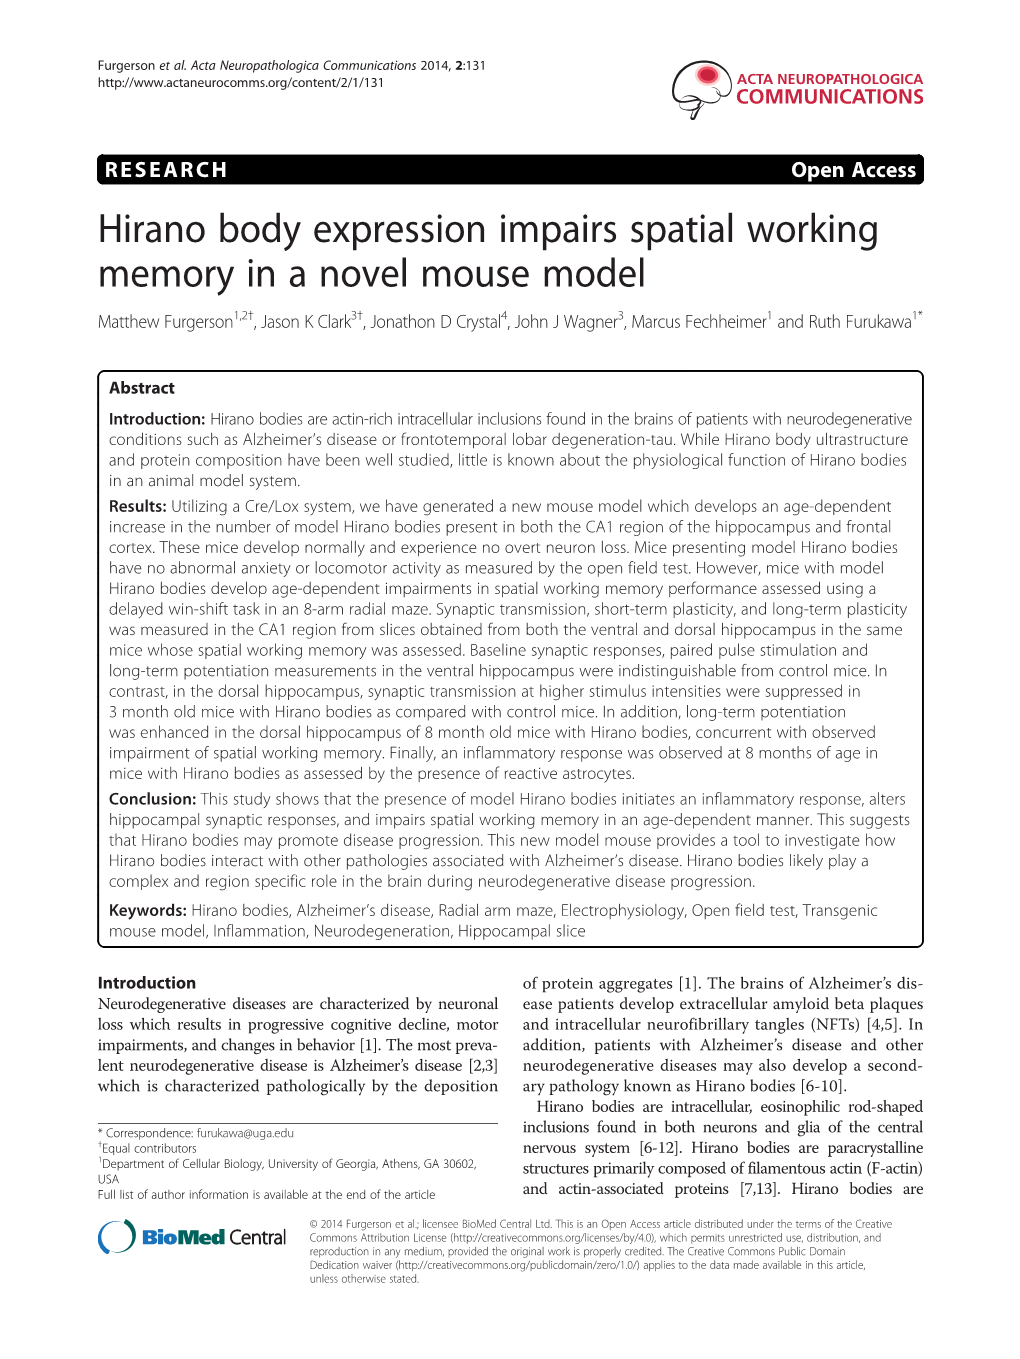 Hirano Body Expression Impairs Spatial Working Memory in a Novel